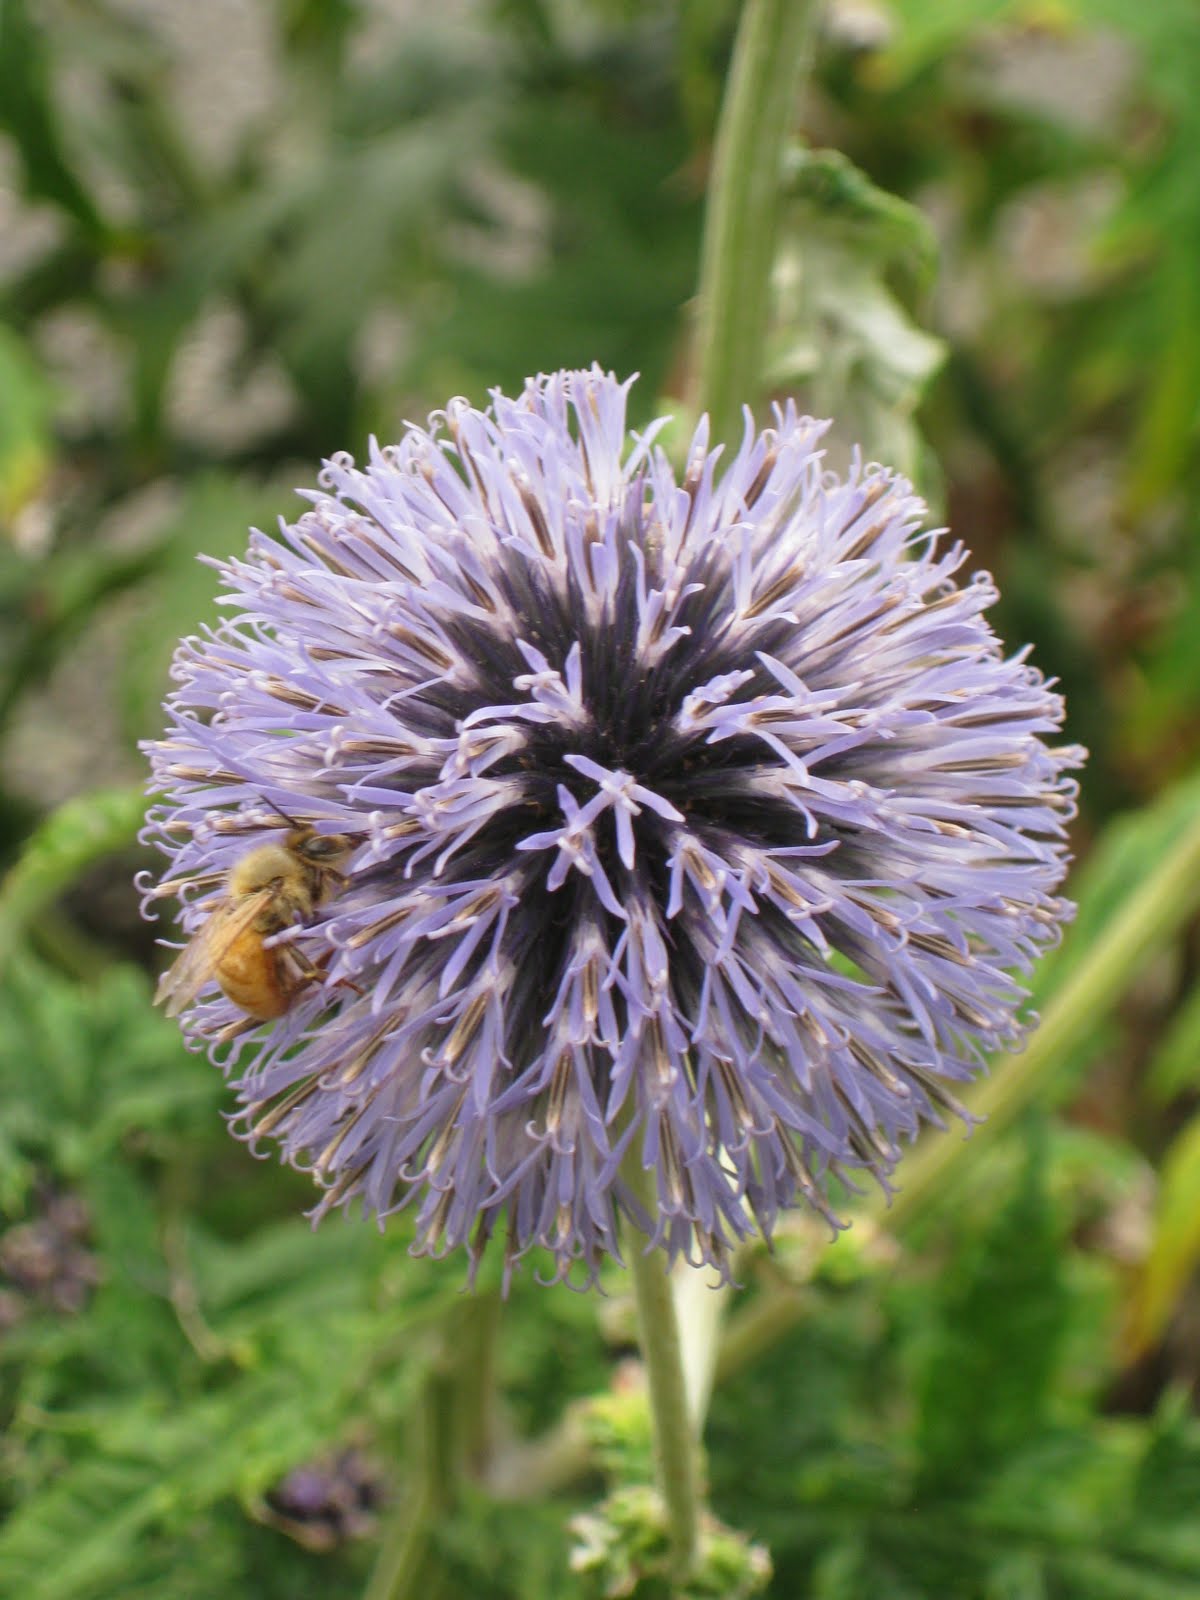 THE URBAN GARDENER: Plant of the Month, July 2010: Globe Thistle